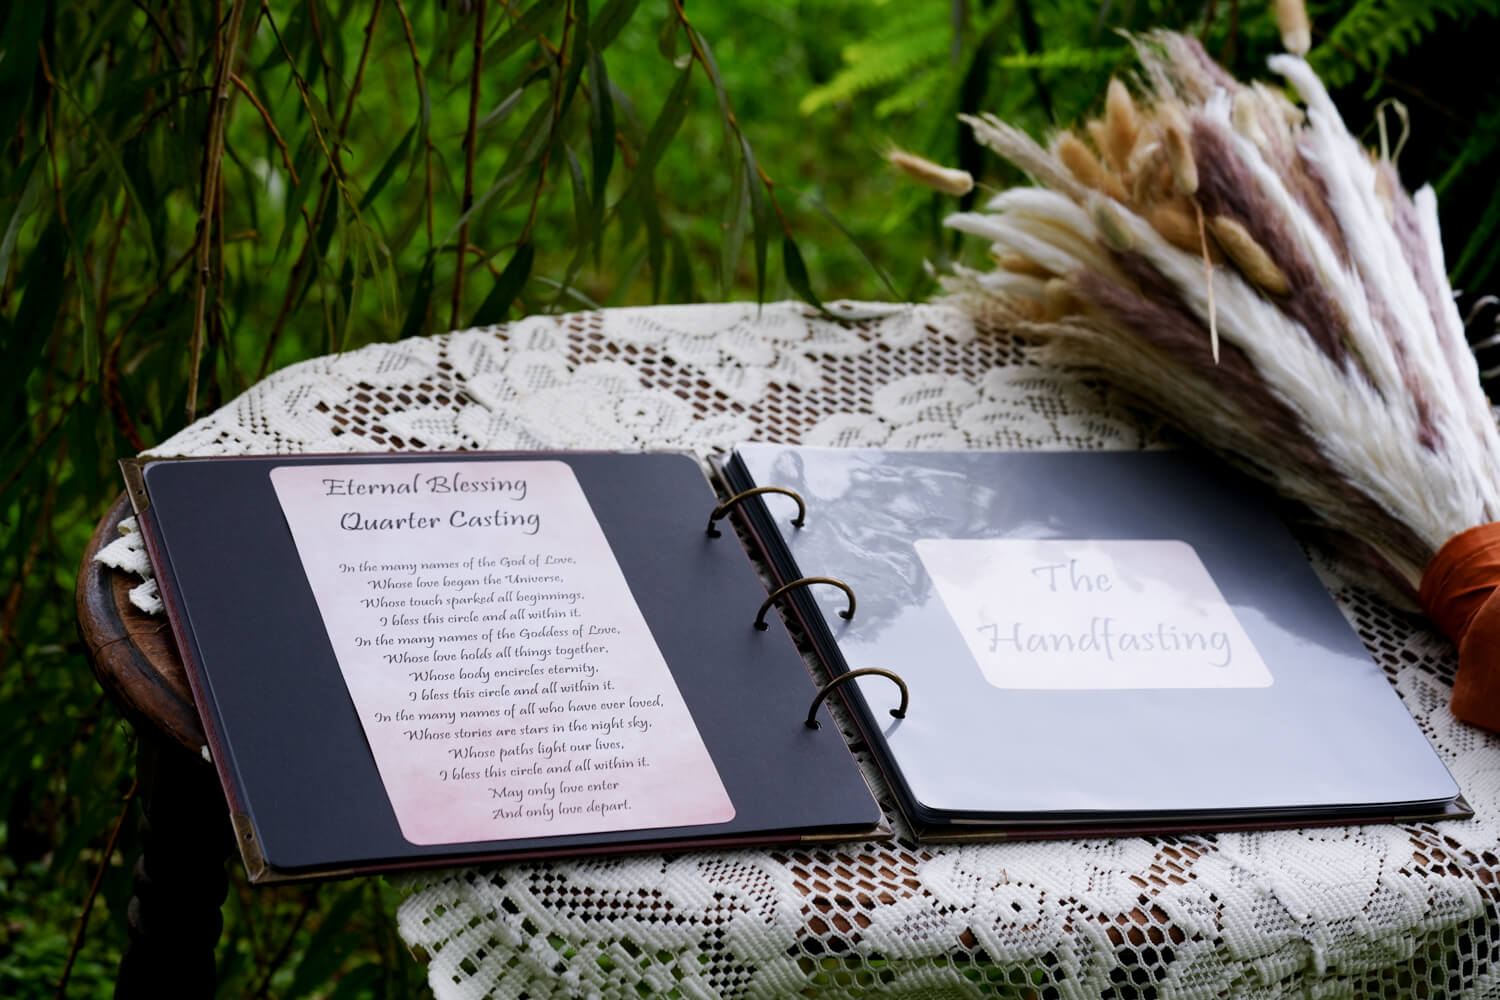 Book with hand fasting ceremony sitting on an antique table with lace cloth and a pampas grass wedding bouquet